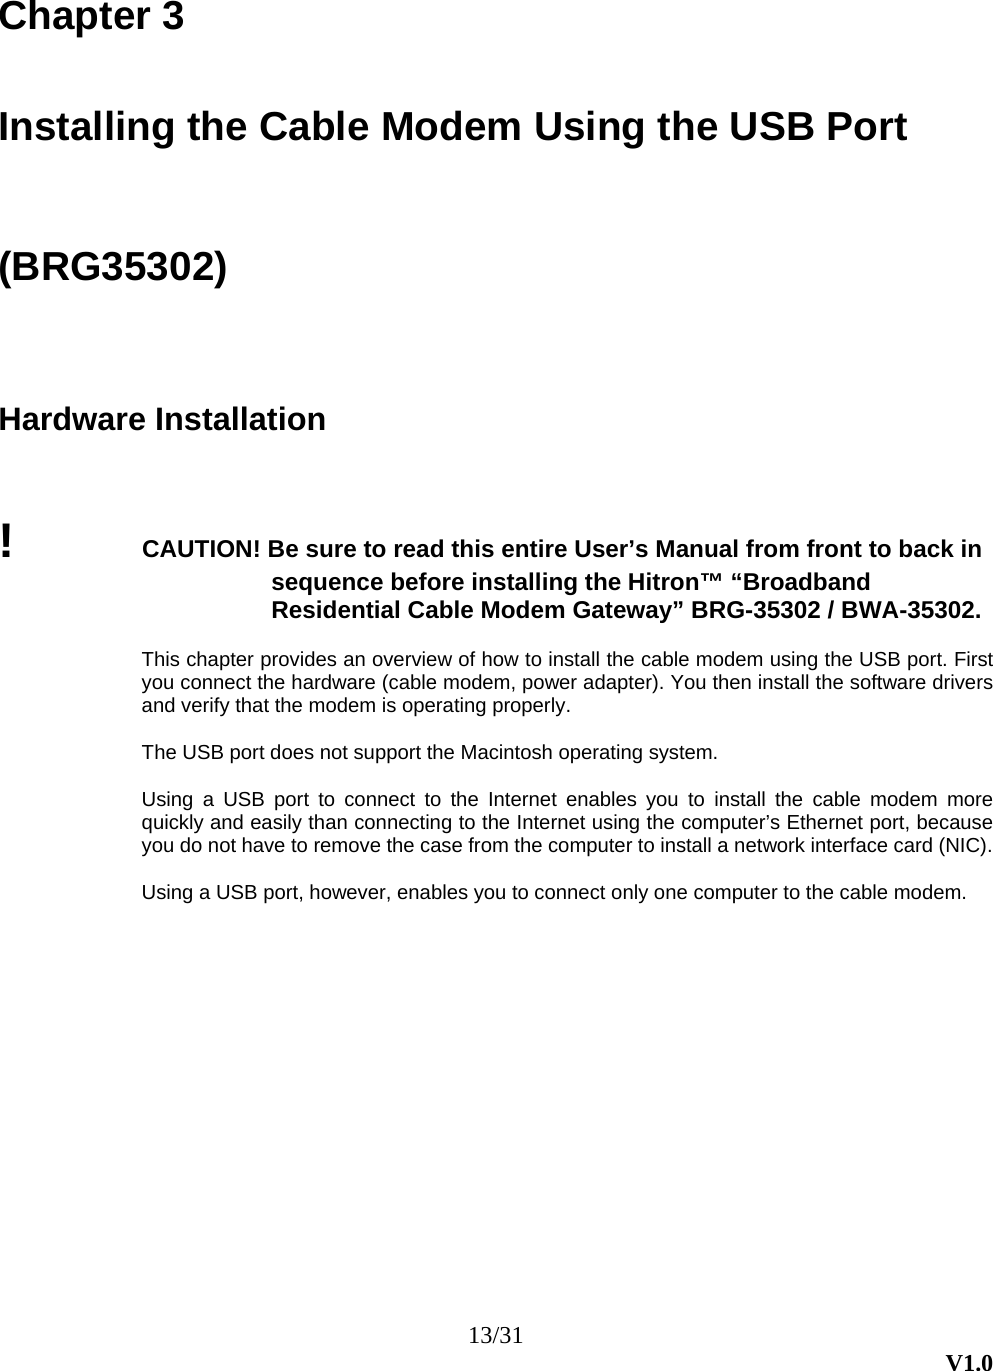 13/31  V1.0 Chapter 3  Installing the Cable Modem Using the USB Port (BRG35302) Hardware Installation !  CAUTION! Be sure to read this entire User’s Manual from front to back in sequence before installing the Hitron™ “Broadband Residential Cable Modem Gateway” BRG-35302 / BWA-35302.  This chapter provides an overview of how to install the cable modem using the USB port. First you connect the hardware (cable modem, power adapter). You then install the software drivers and verify that the modem is operating properly.  The USB port does not support the Macintosh operating system.  Using a USB port to connect to the Internet enables you to install the cable modem more quickly and easily than connecting to the Internet using the computer’s Ethernet port, because you do not have to remove the case from the computer to install a network interface card (NIC).    Using a USB port, however, enables you to connect only one computer to the cable modem. 